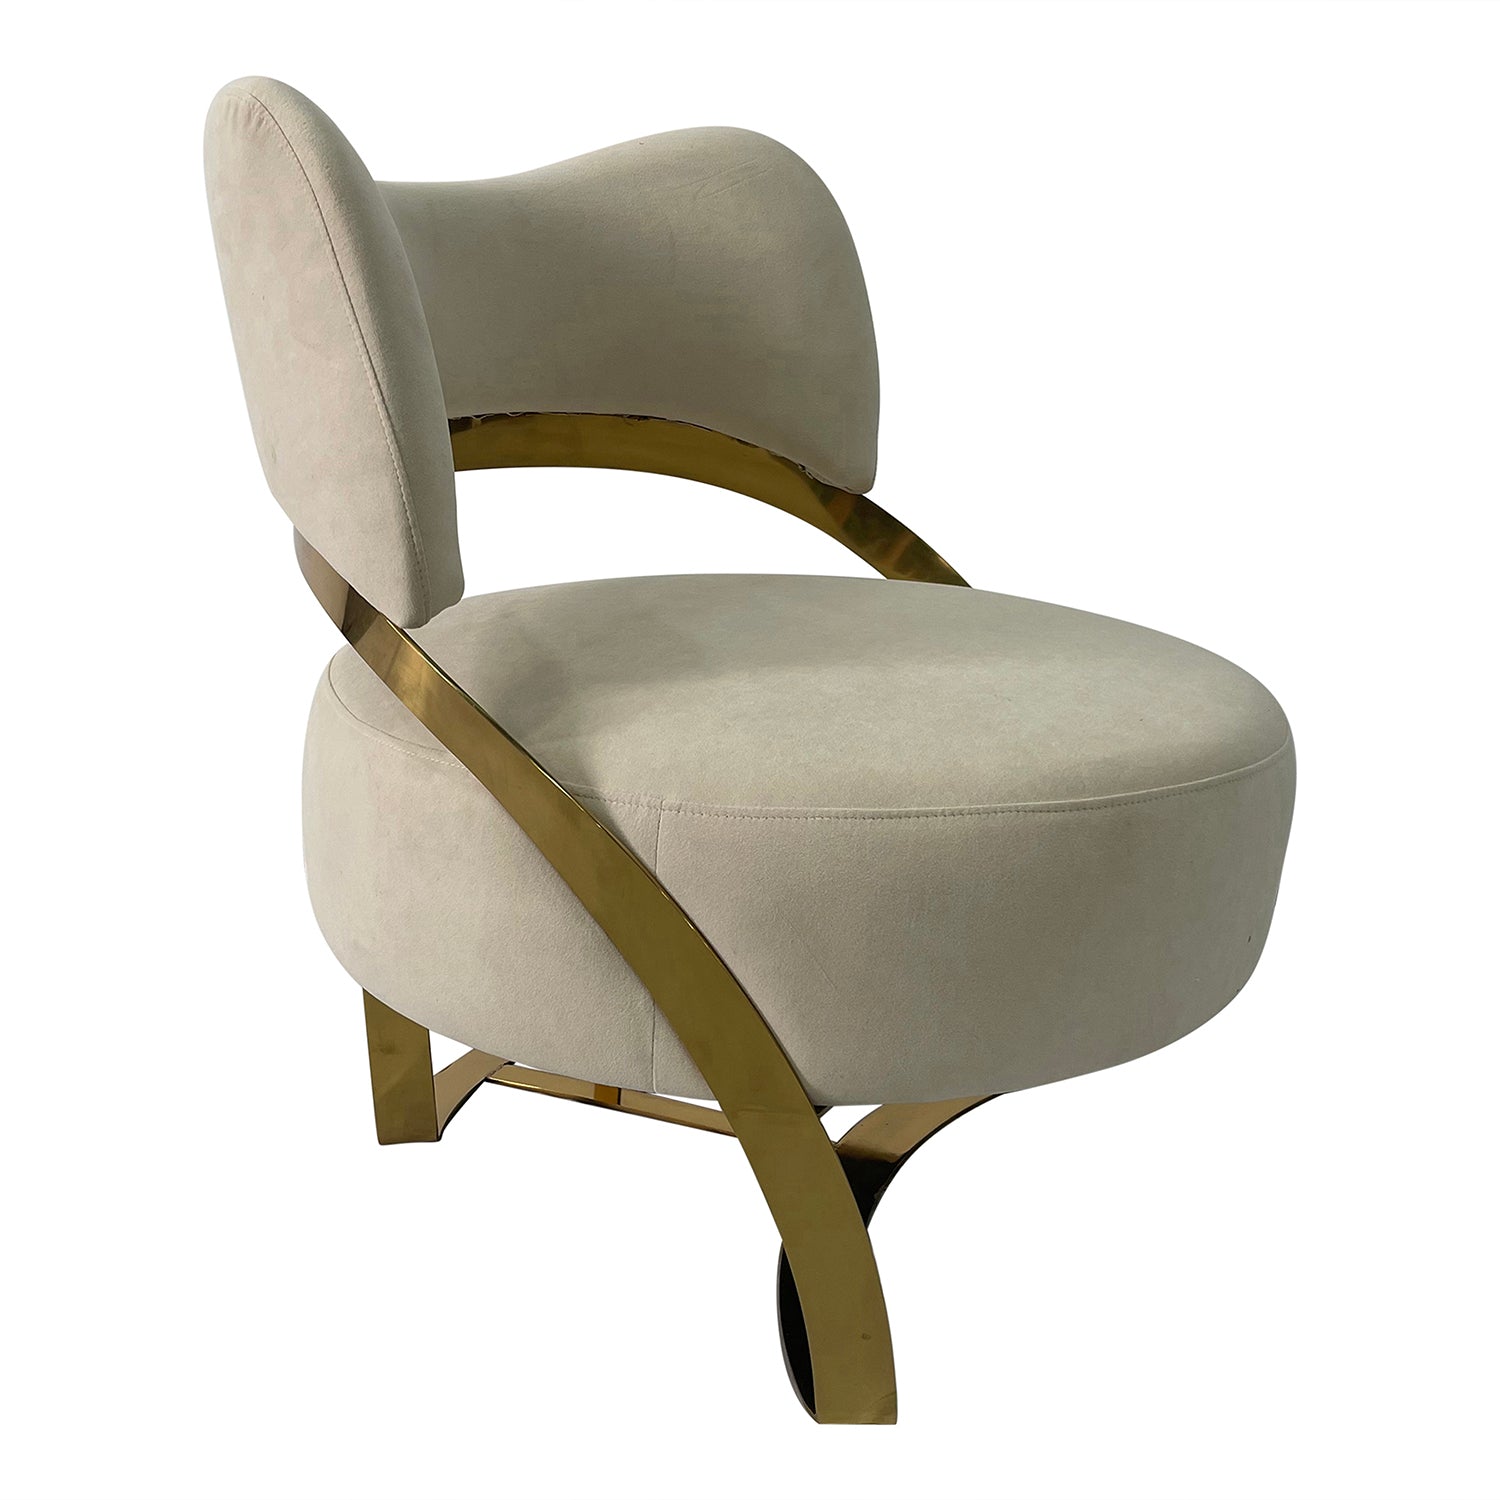 Light Beige and Gold Sofa Chair